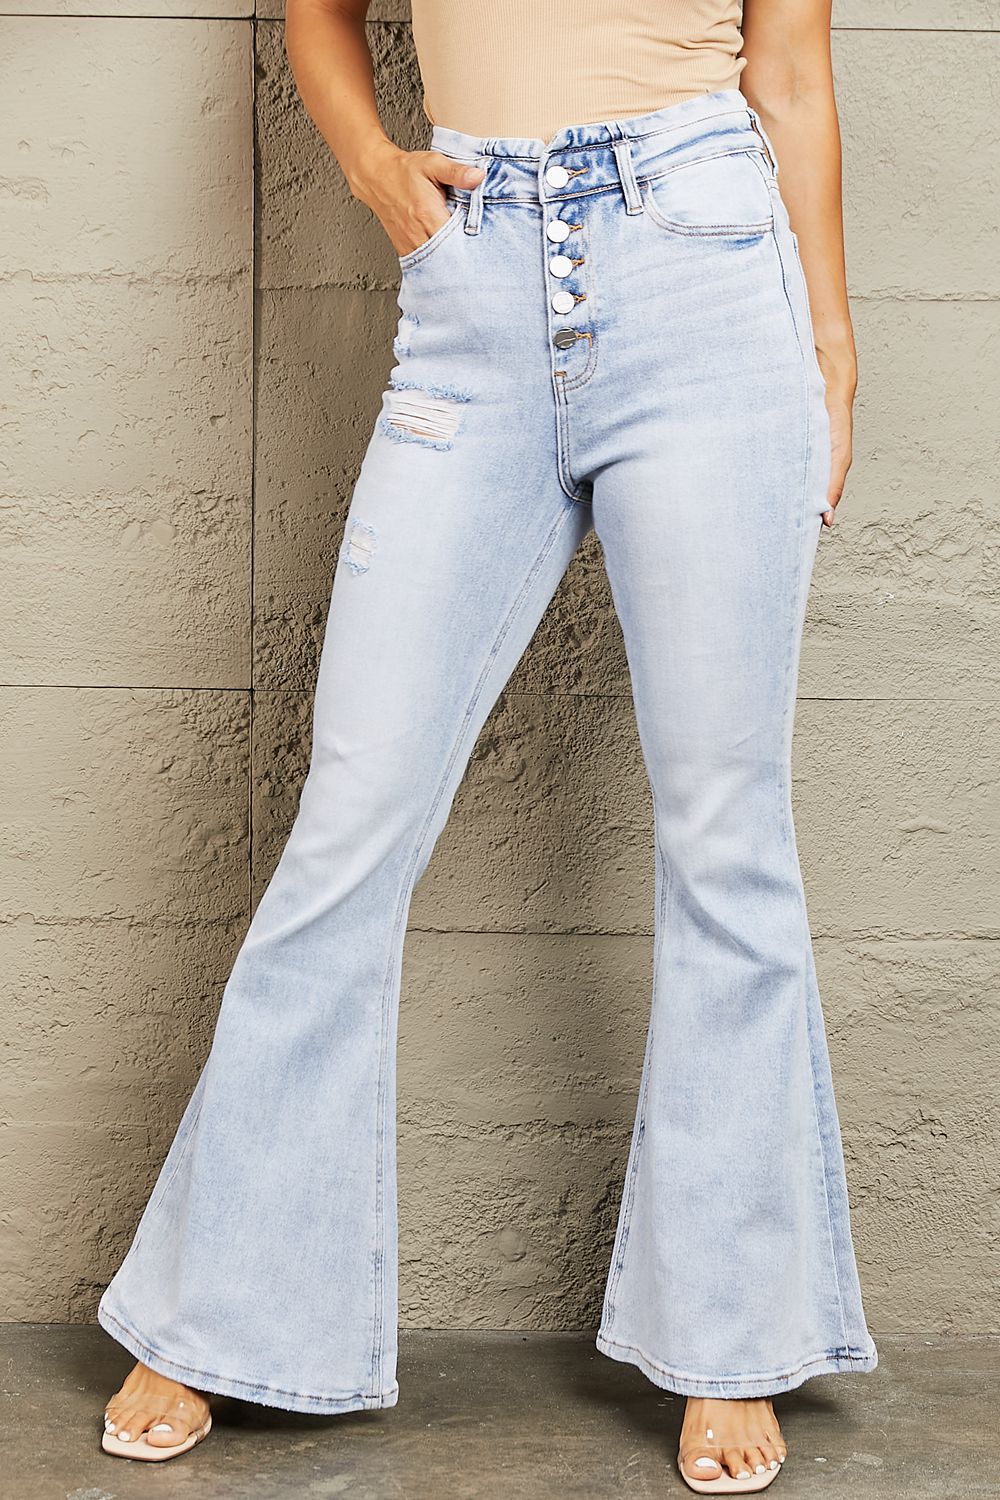 BAYEAS High Waisted Button Fly Flare Jeans - nailedmoms